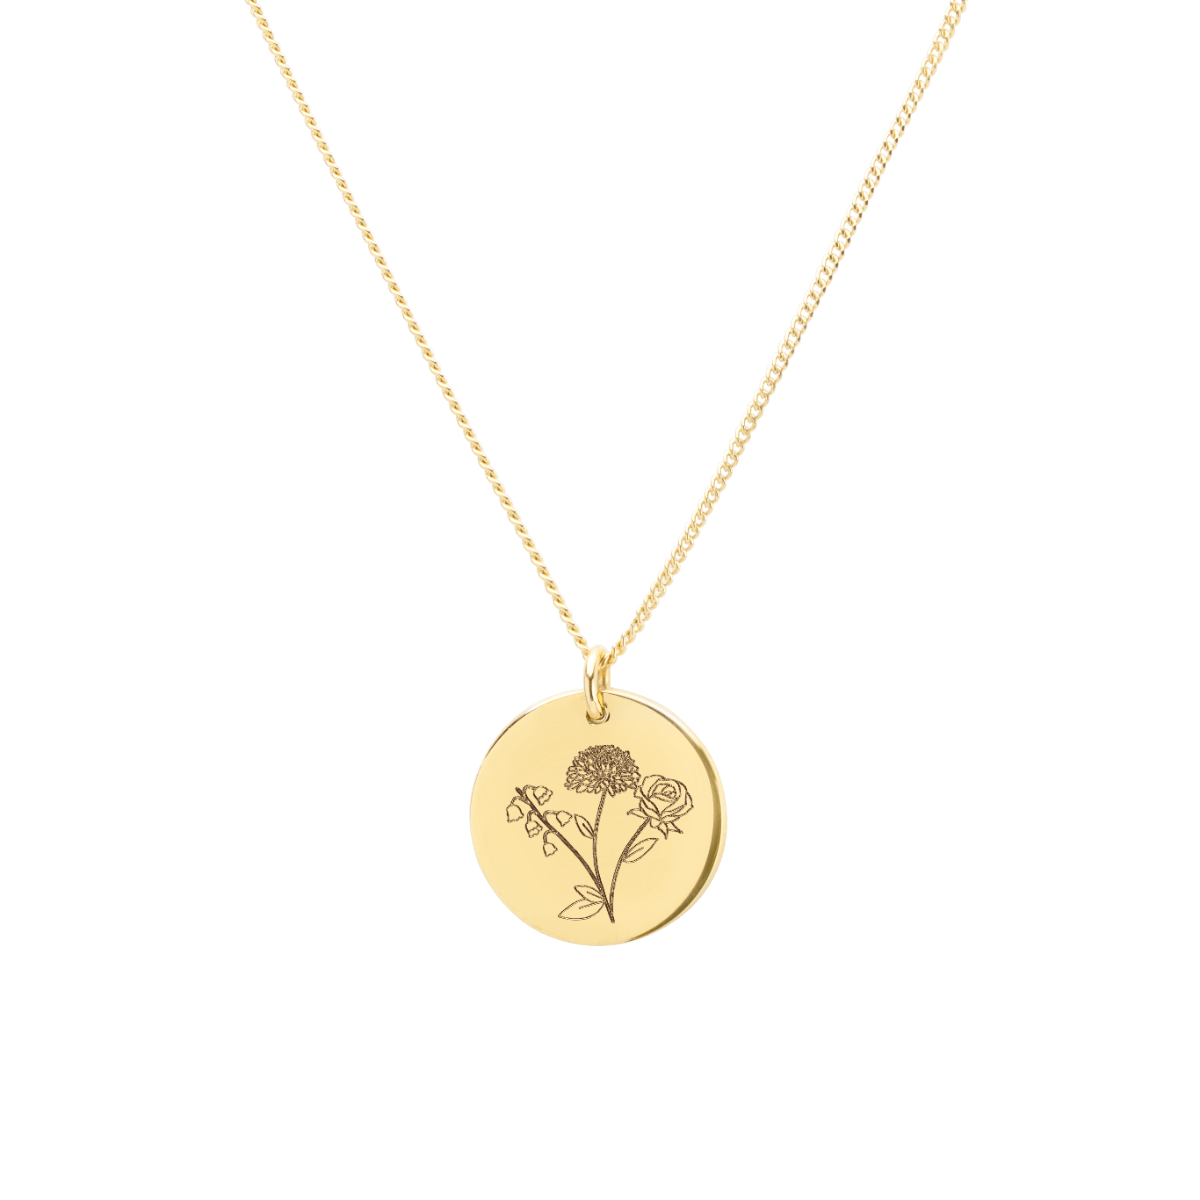 Combined Birth Flower Necklace - Birthday Gifts for Mom -CamillaBoutique